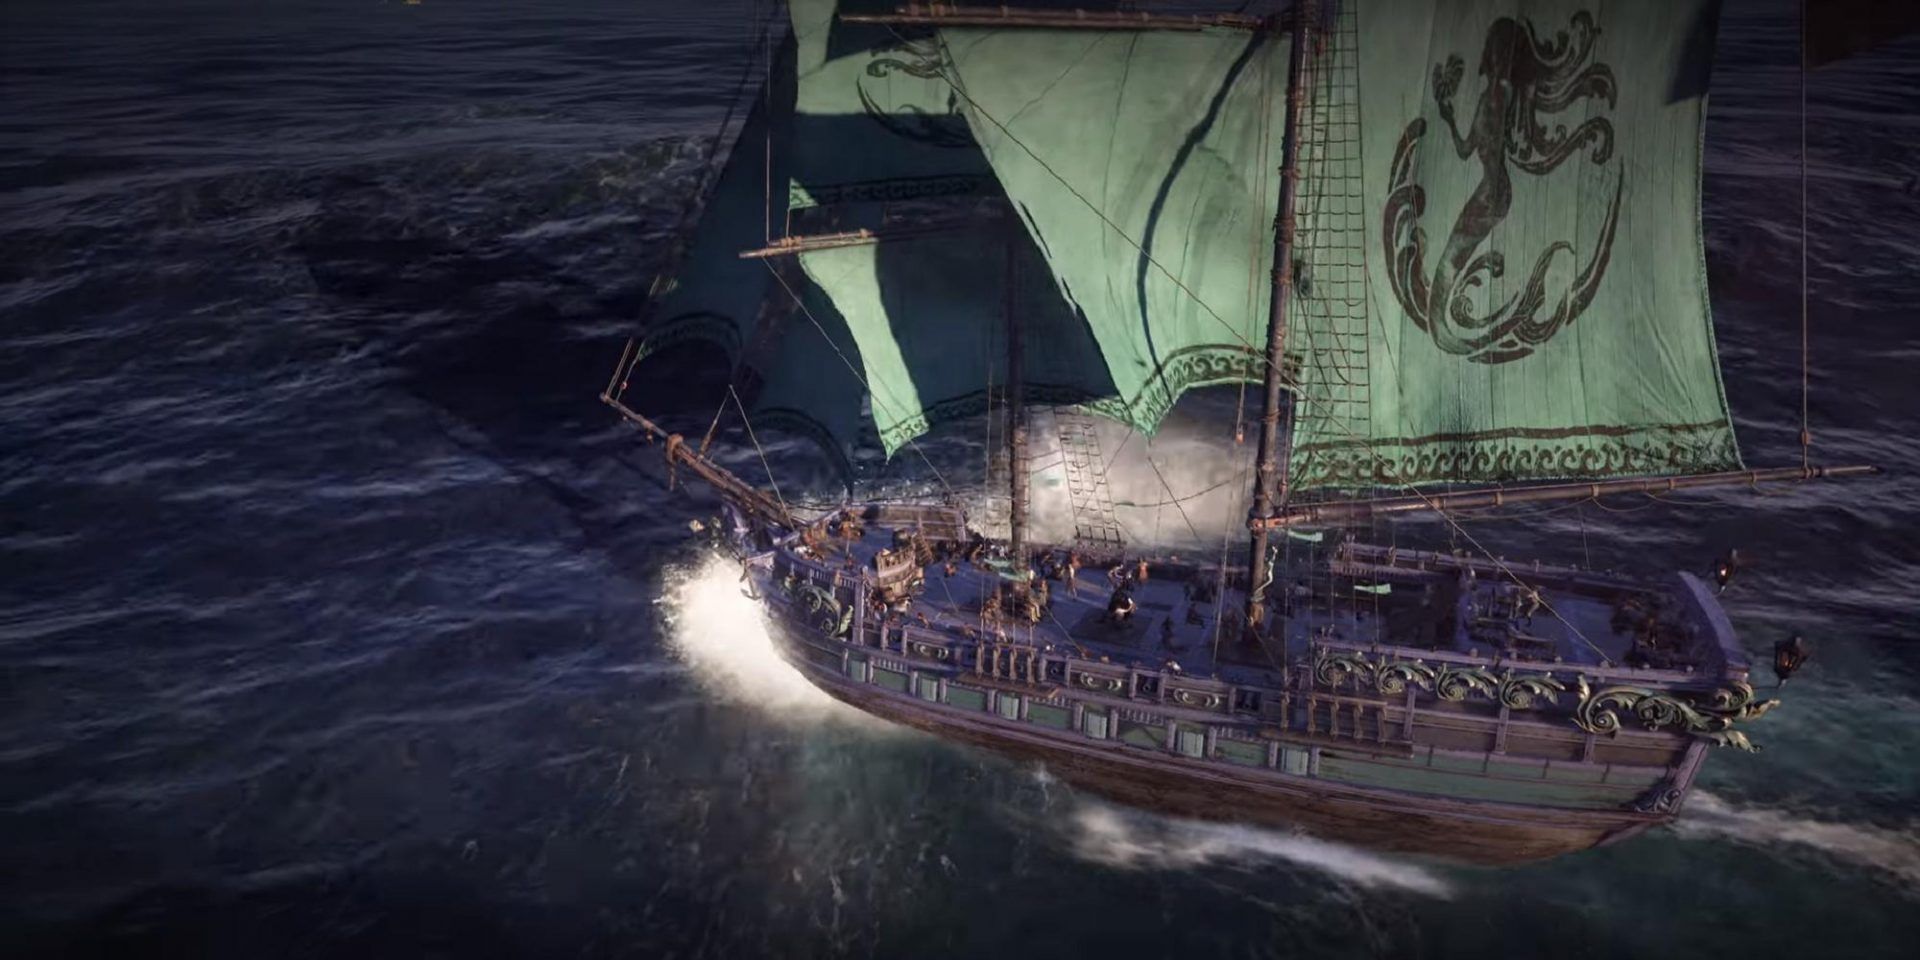 Skull And Bones Ship With Green Sails From Trailer